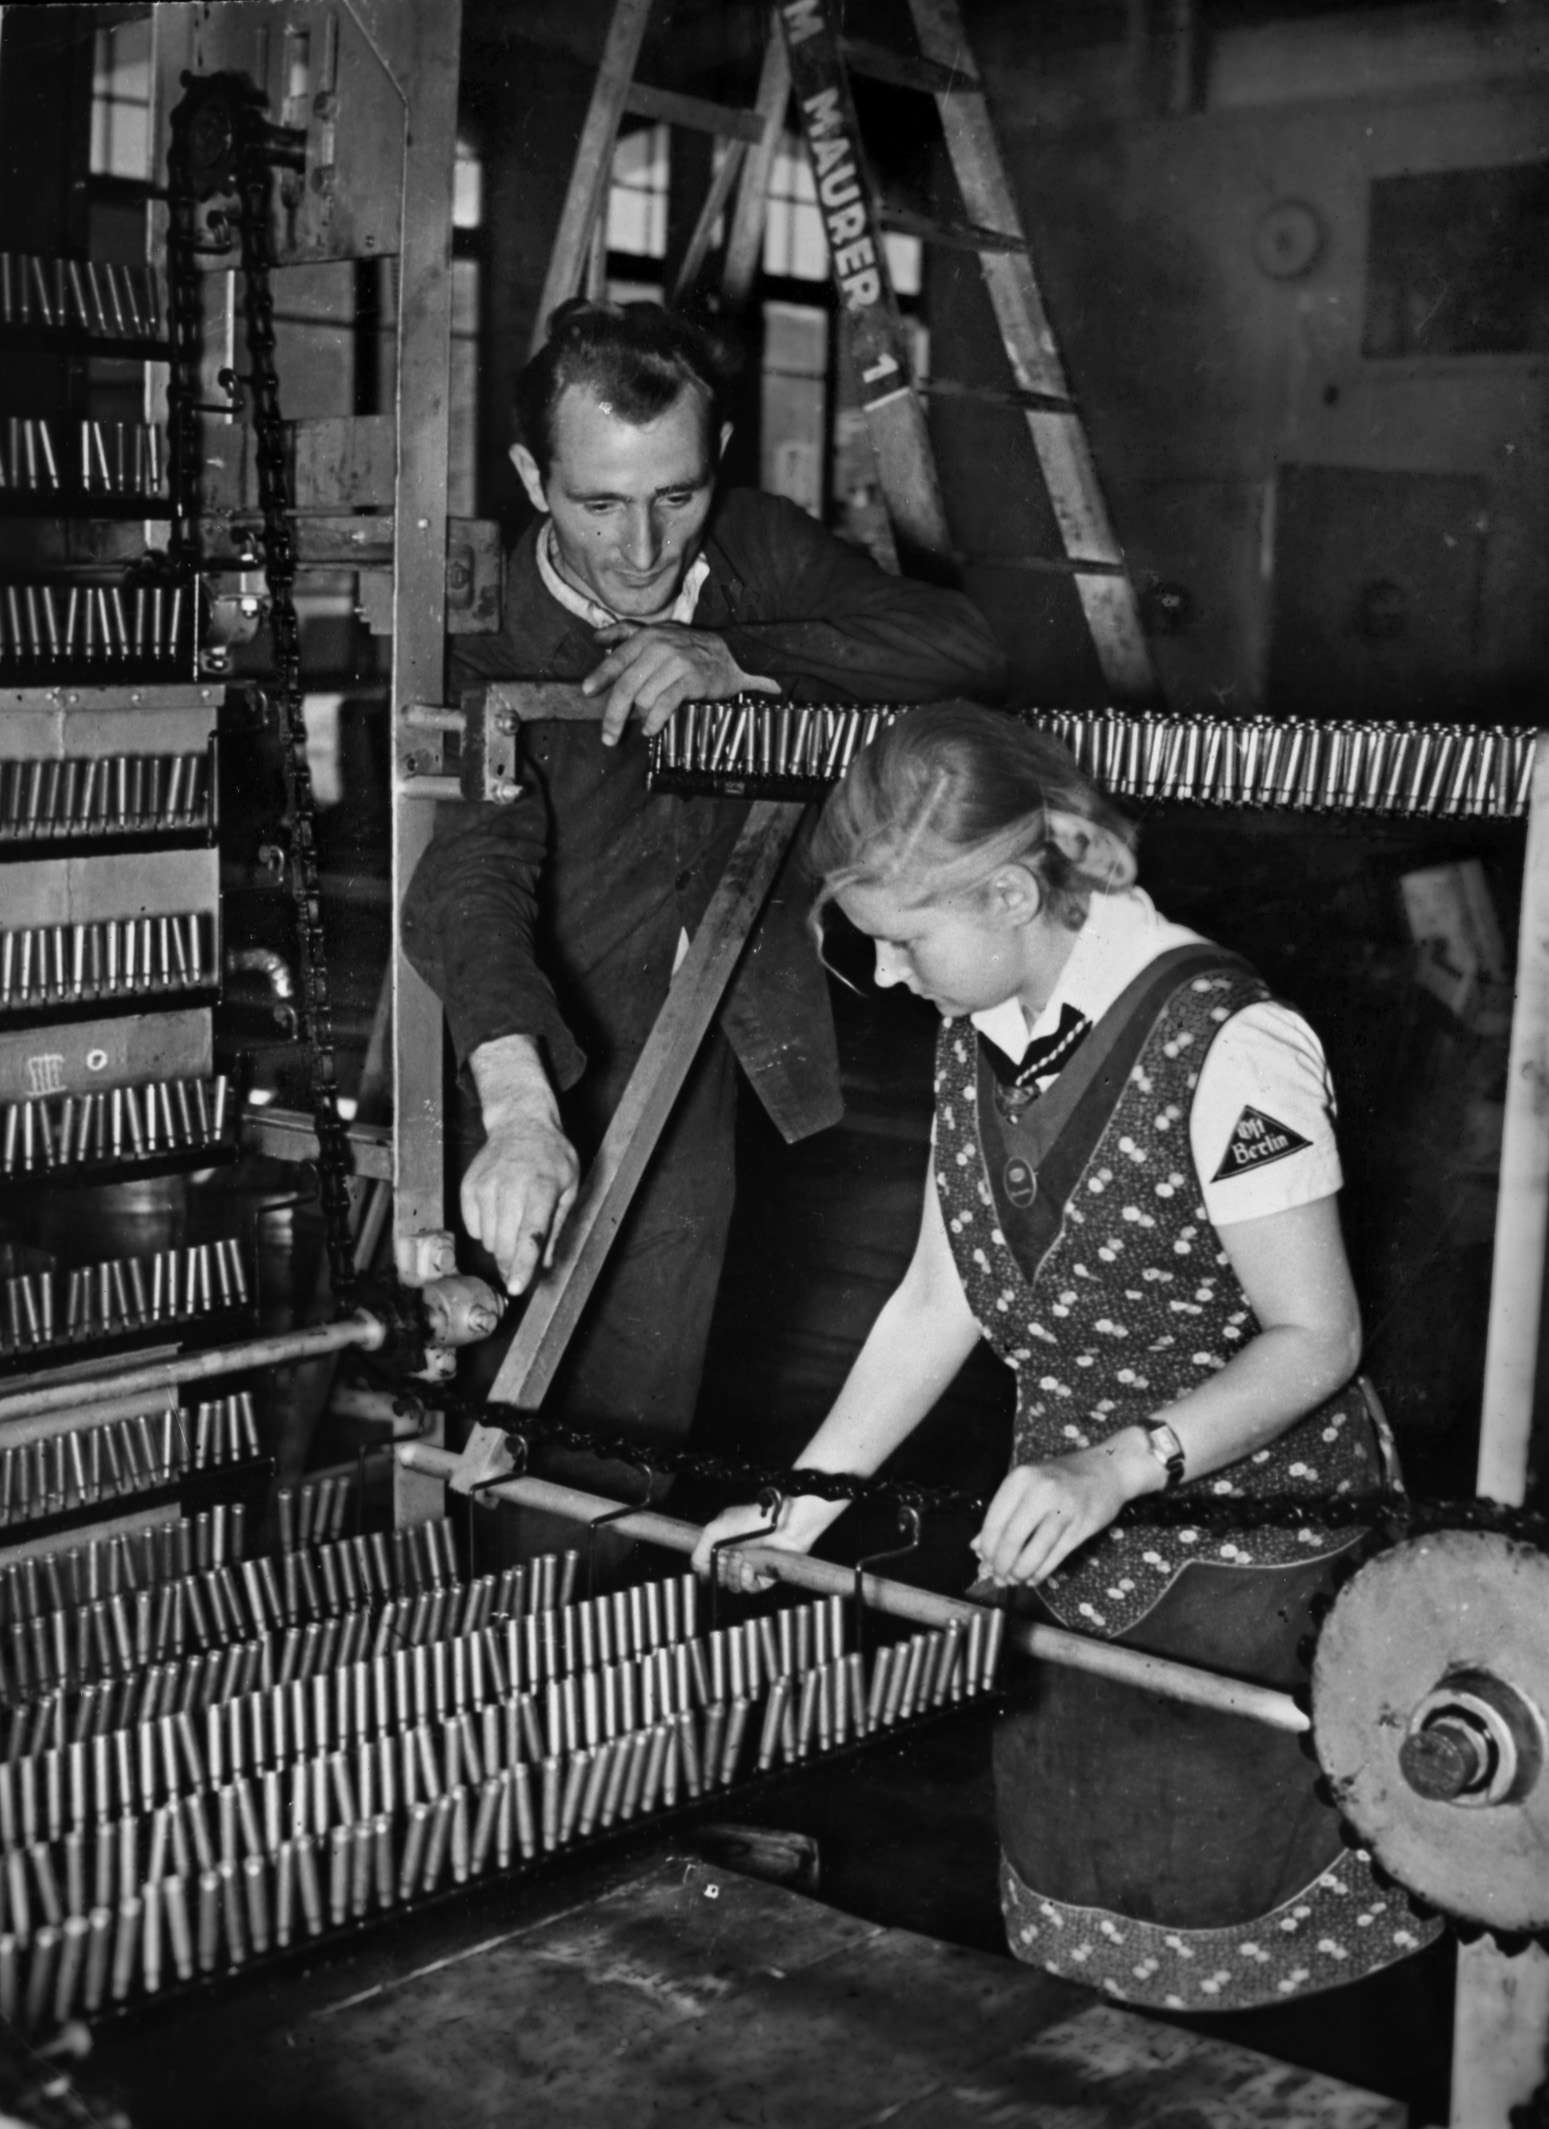 A BDM leader shows a young girl how to operate a piece of machinery on the floor of a German armaments factory in August 1942. Due to labor shortages, children were often pressed into service doing jobs that adults might otherwise perform.